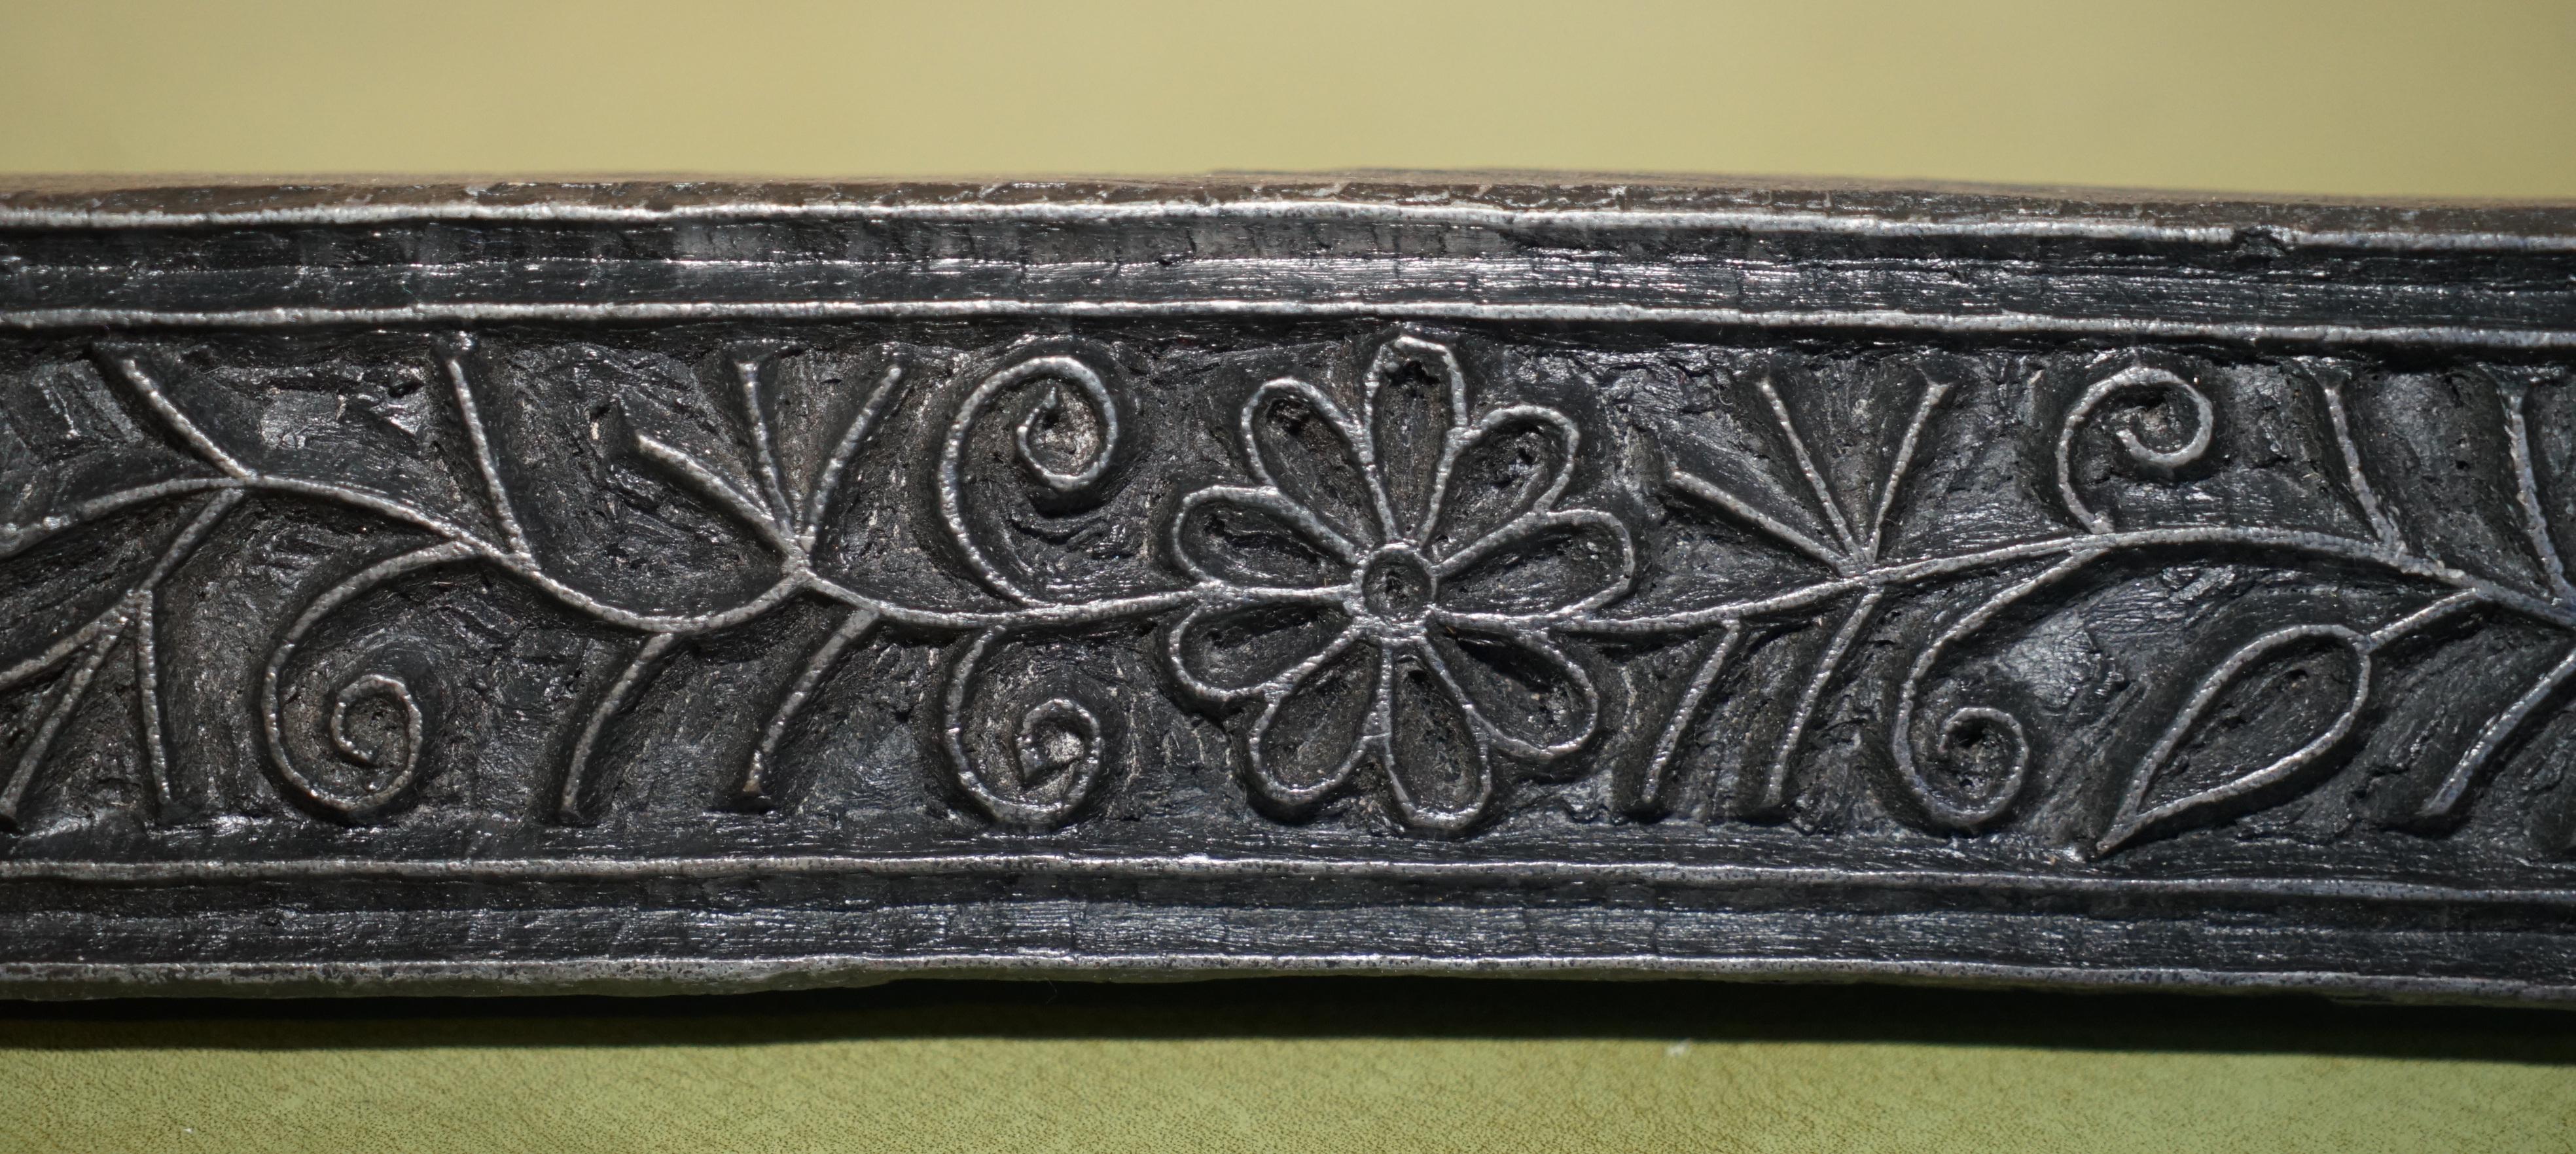 Very Collectable Antique Hand Carved Floral Boarder Printing Block for Wallpaper For Sale 1